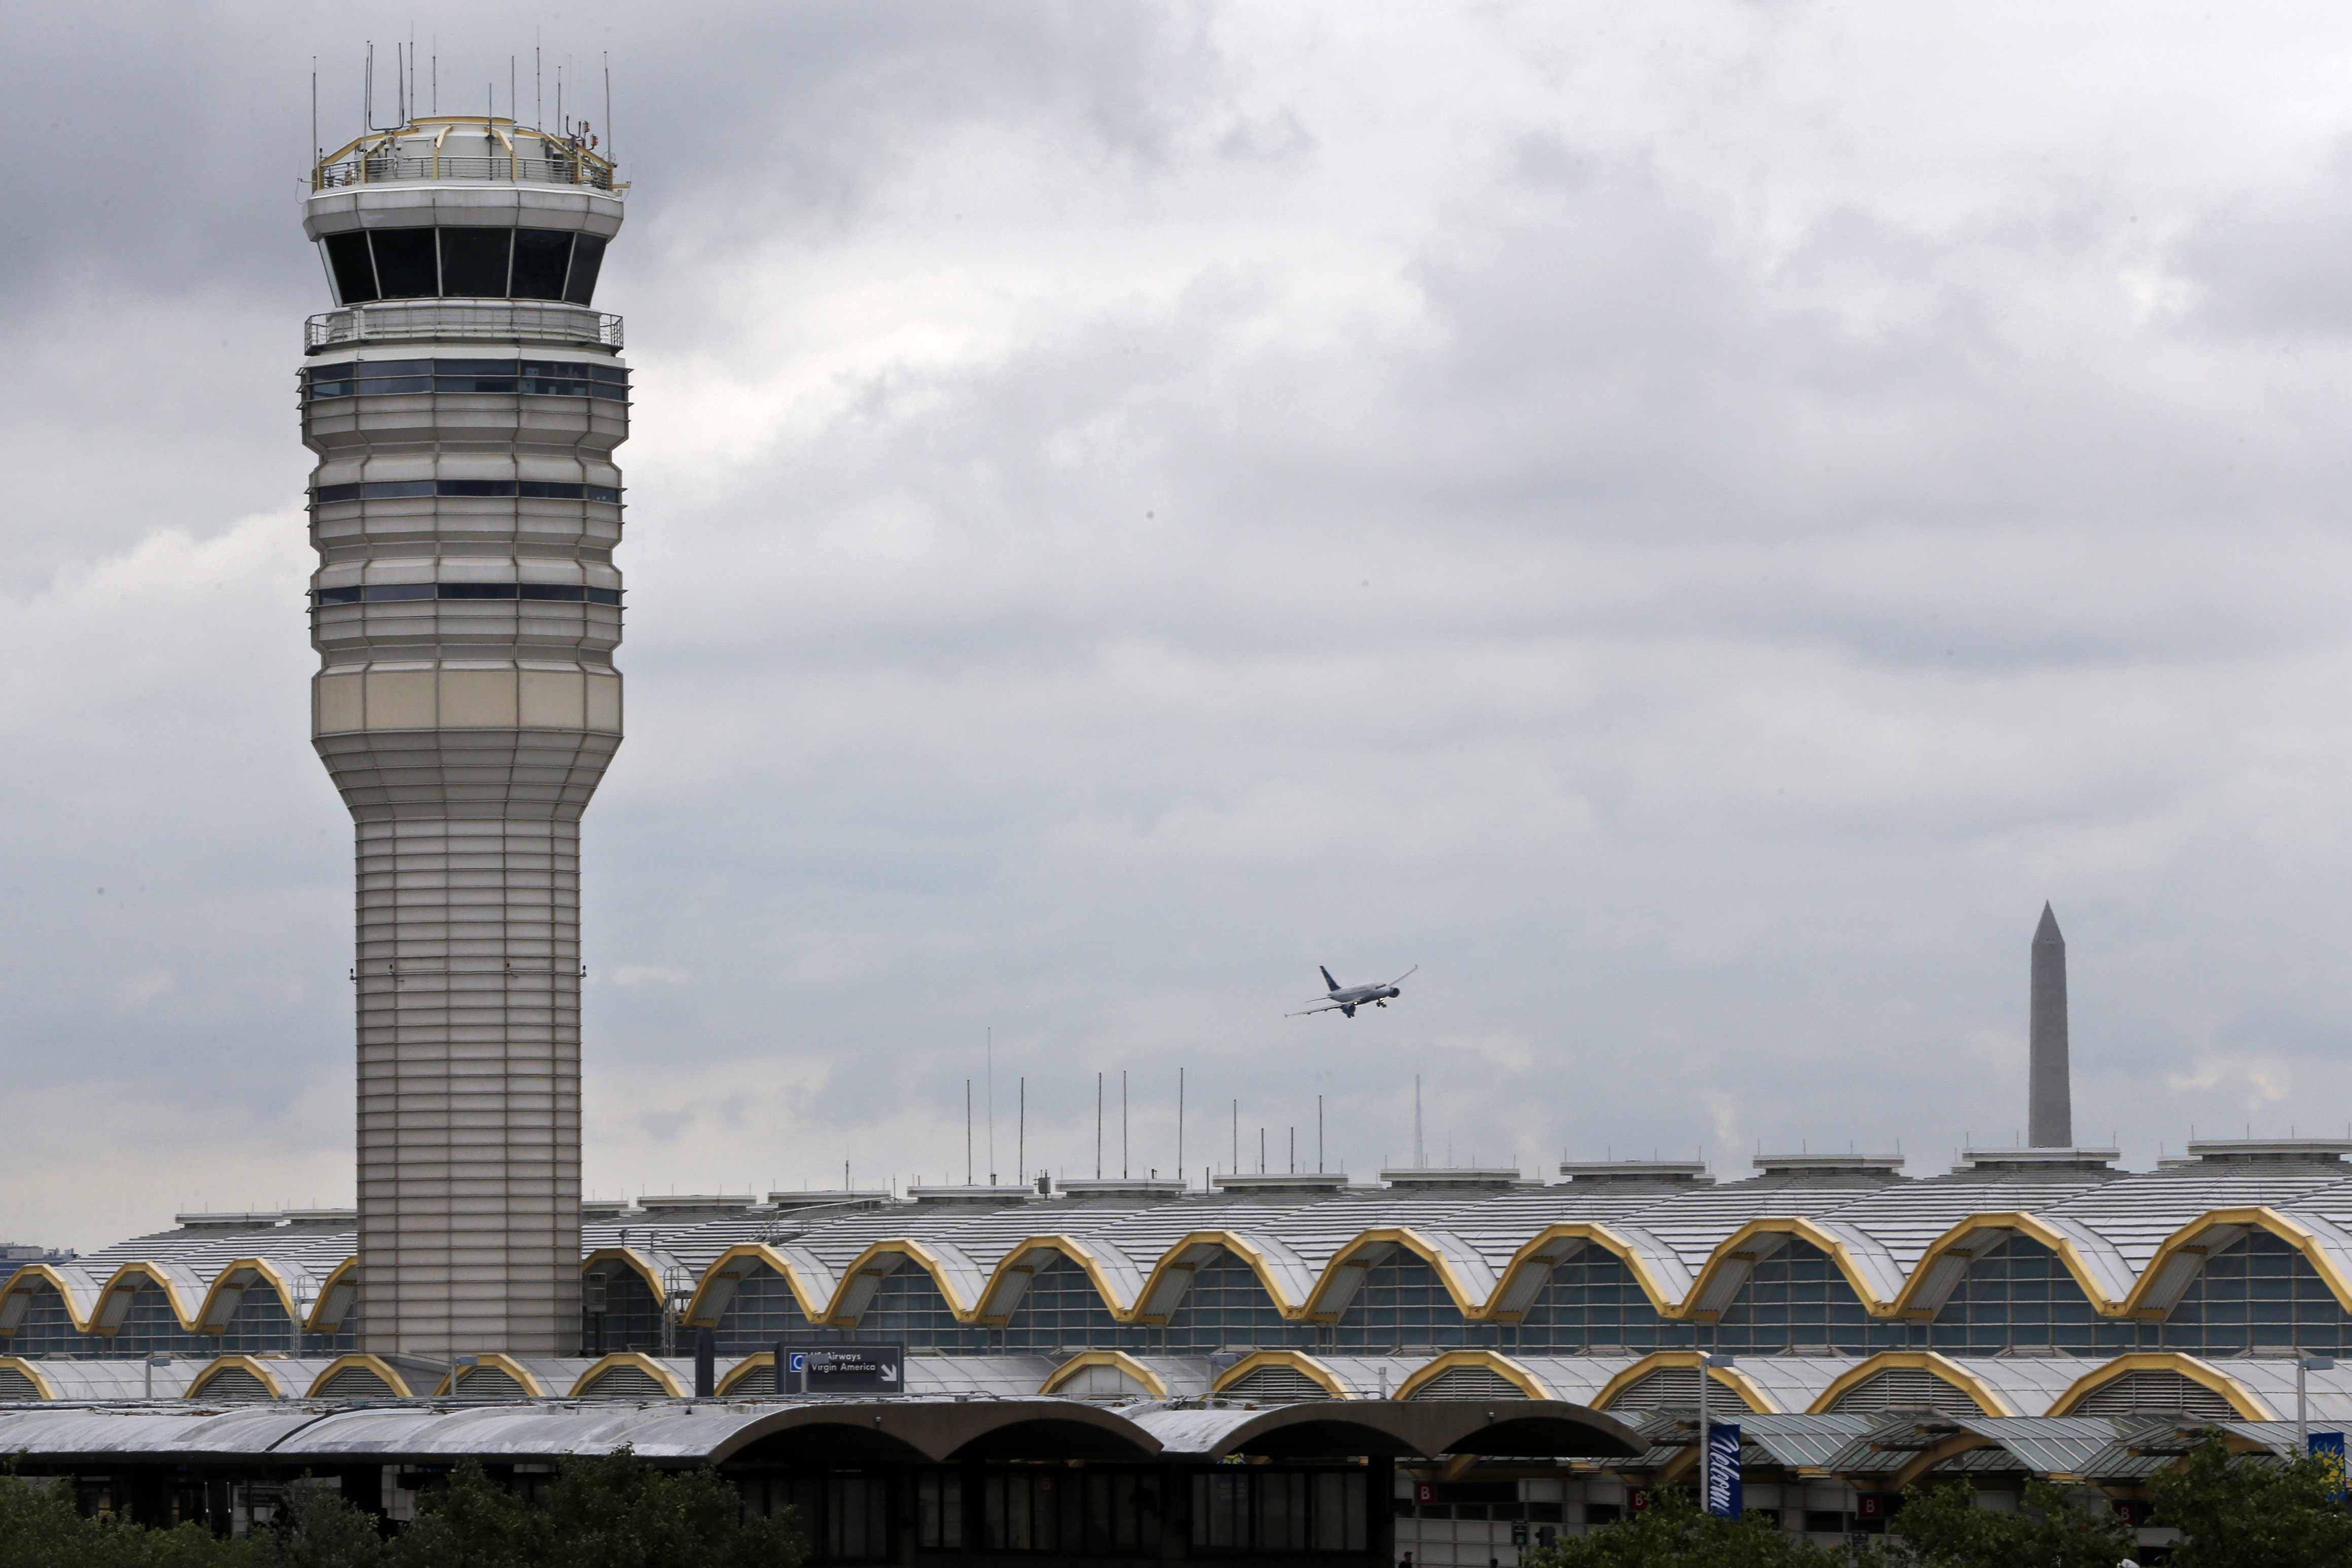 An airplane flies between the air traffic control tower and the Washington Monument at Washington's Ronald Reagan National Airport on Monday, Aug. 10, 2015. For more than three years, the government has kept secret a study it requested that found air traffic controllers work schedules often lead to chronic fatigue, making them less alert and endangering the safety of the national air traffic system, according to report on the study obtained by The Associated Press. (AP Photo/Jacquelyn Martin)